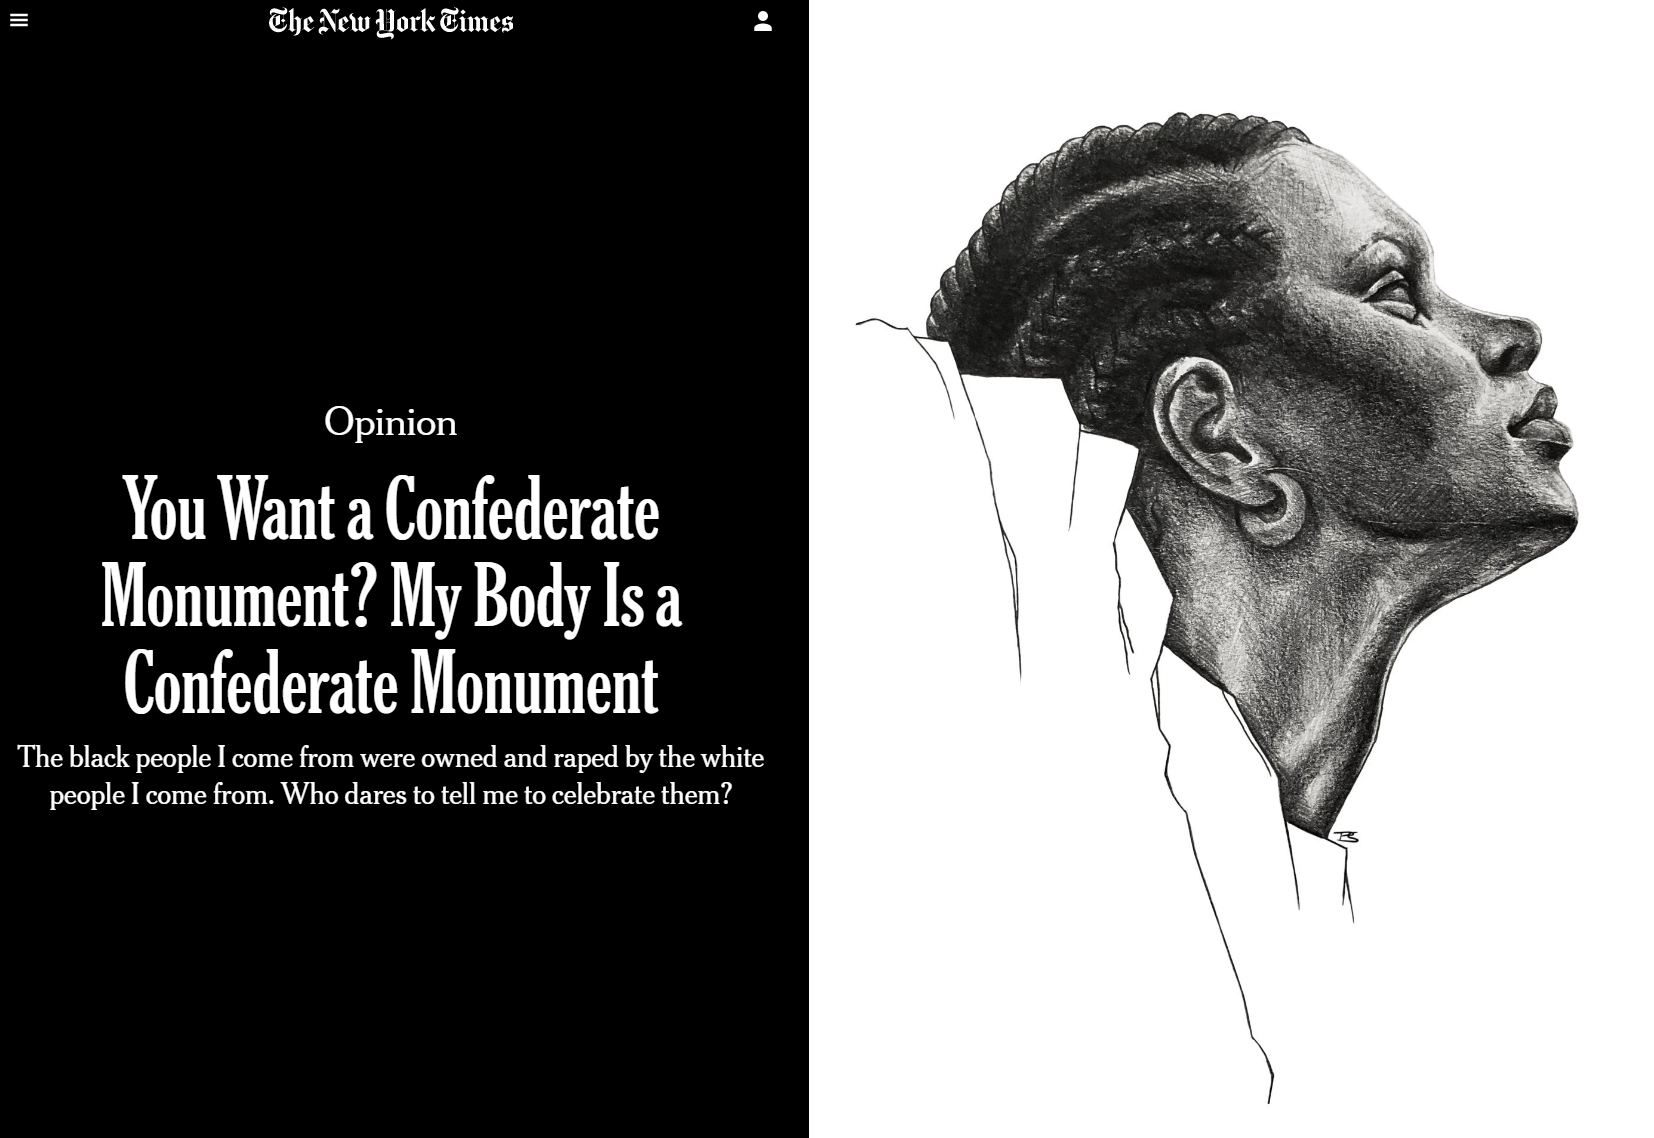 NYT article image